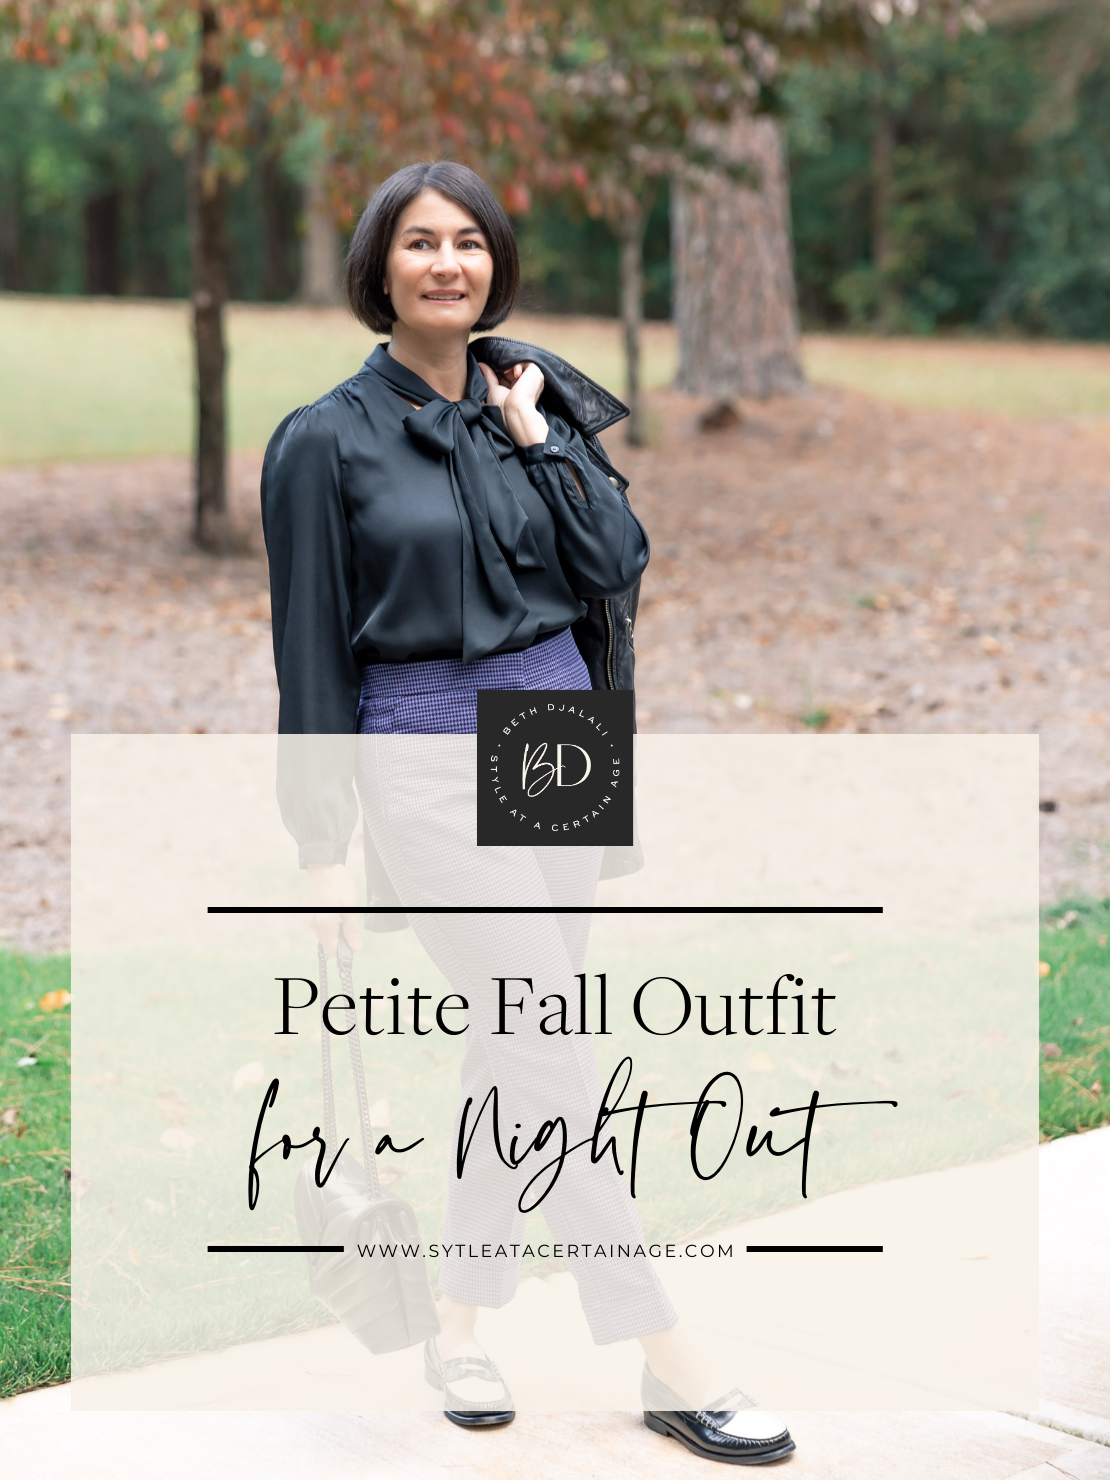 Petite Fall Outfit for a Night Out